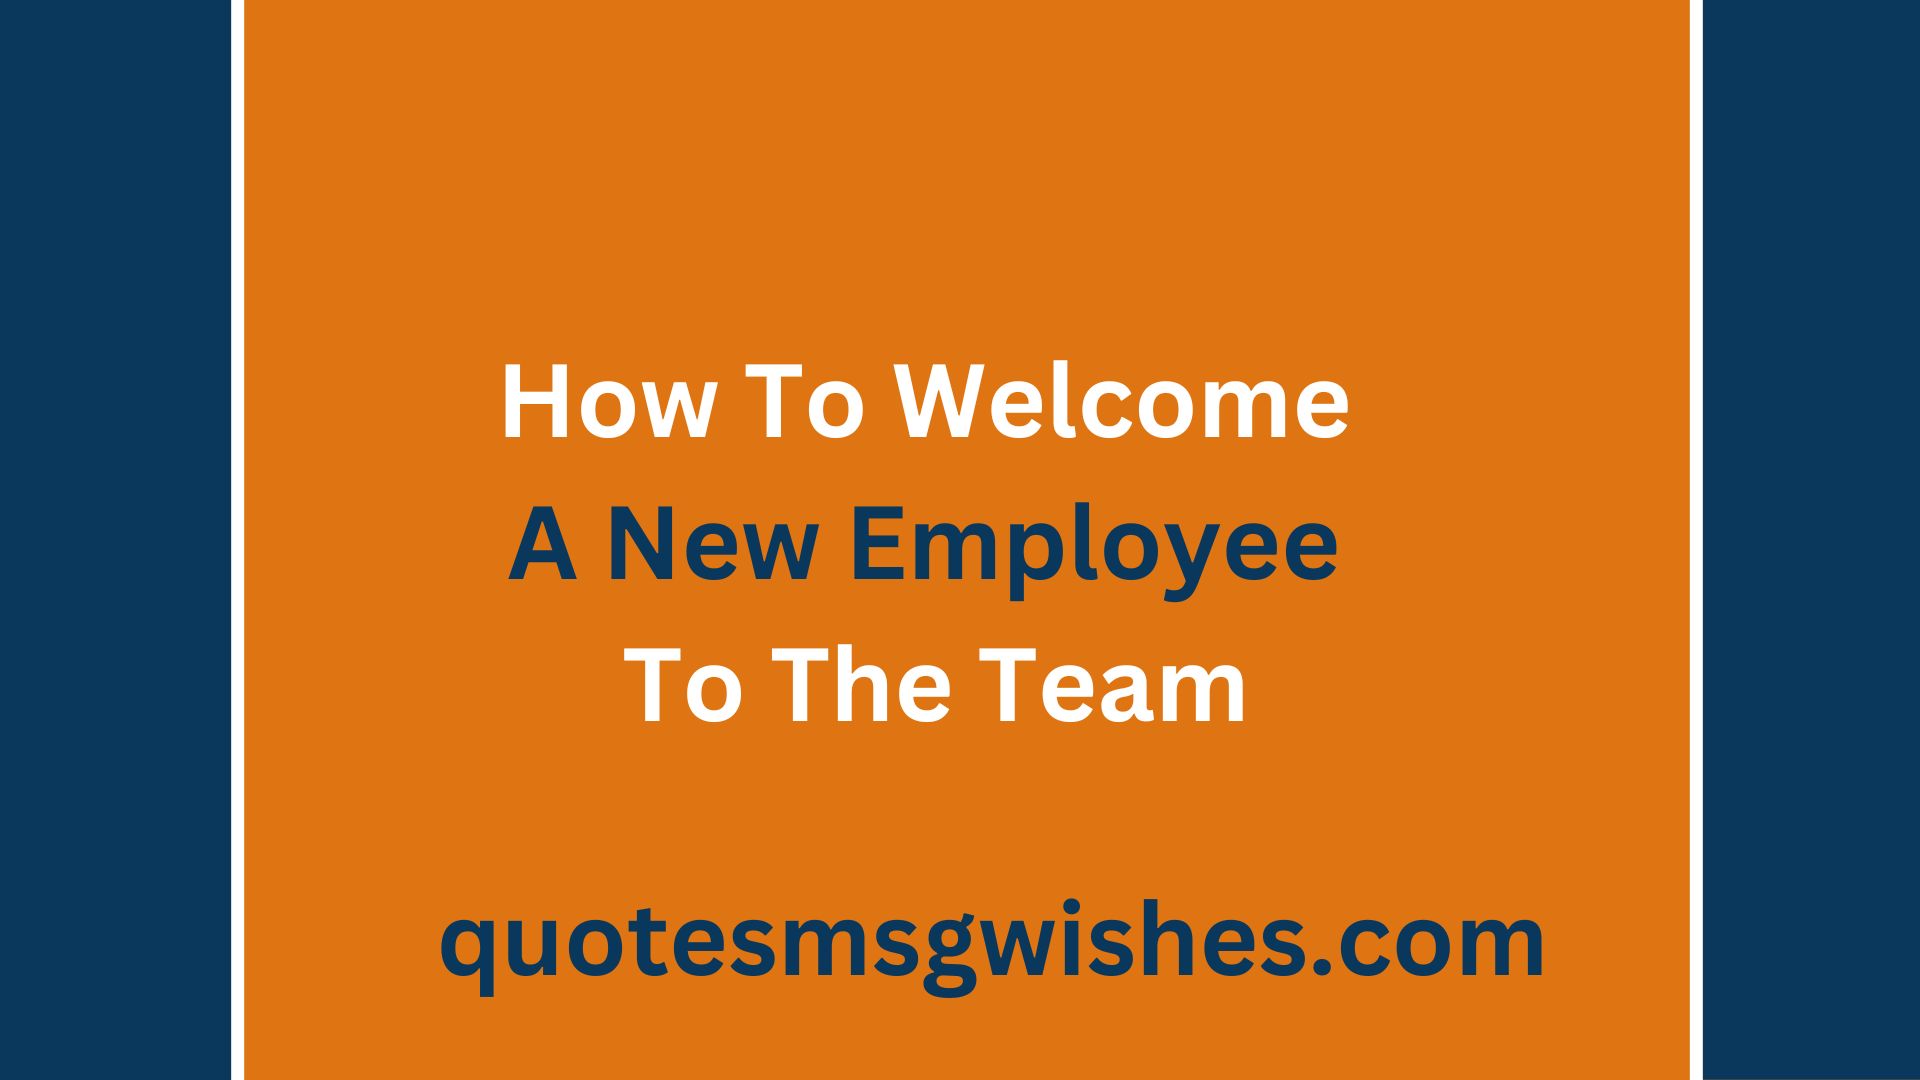 How To Welcome A New Employee To The Team